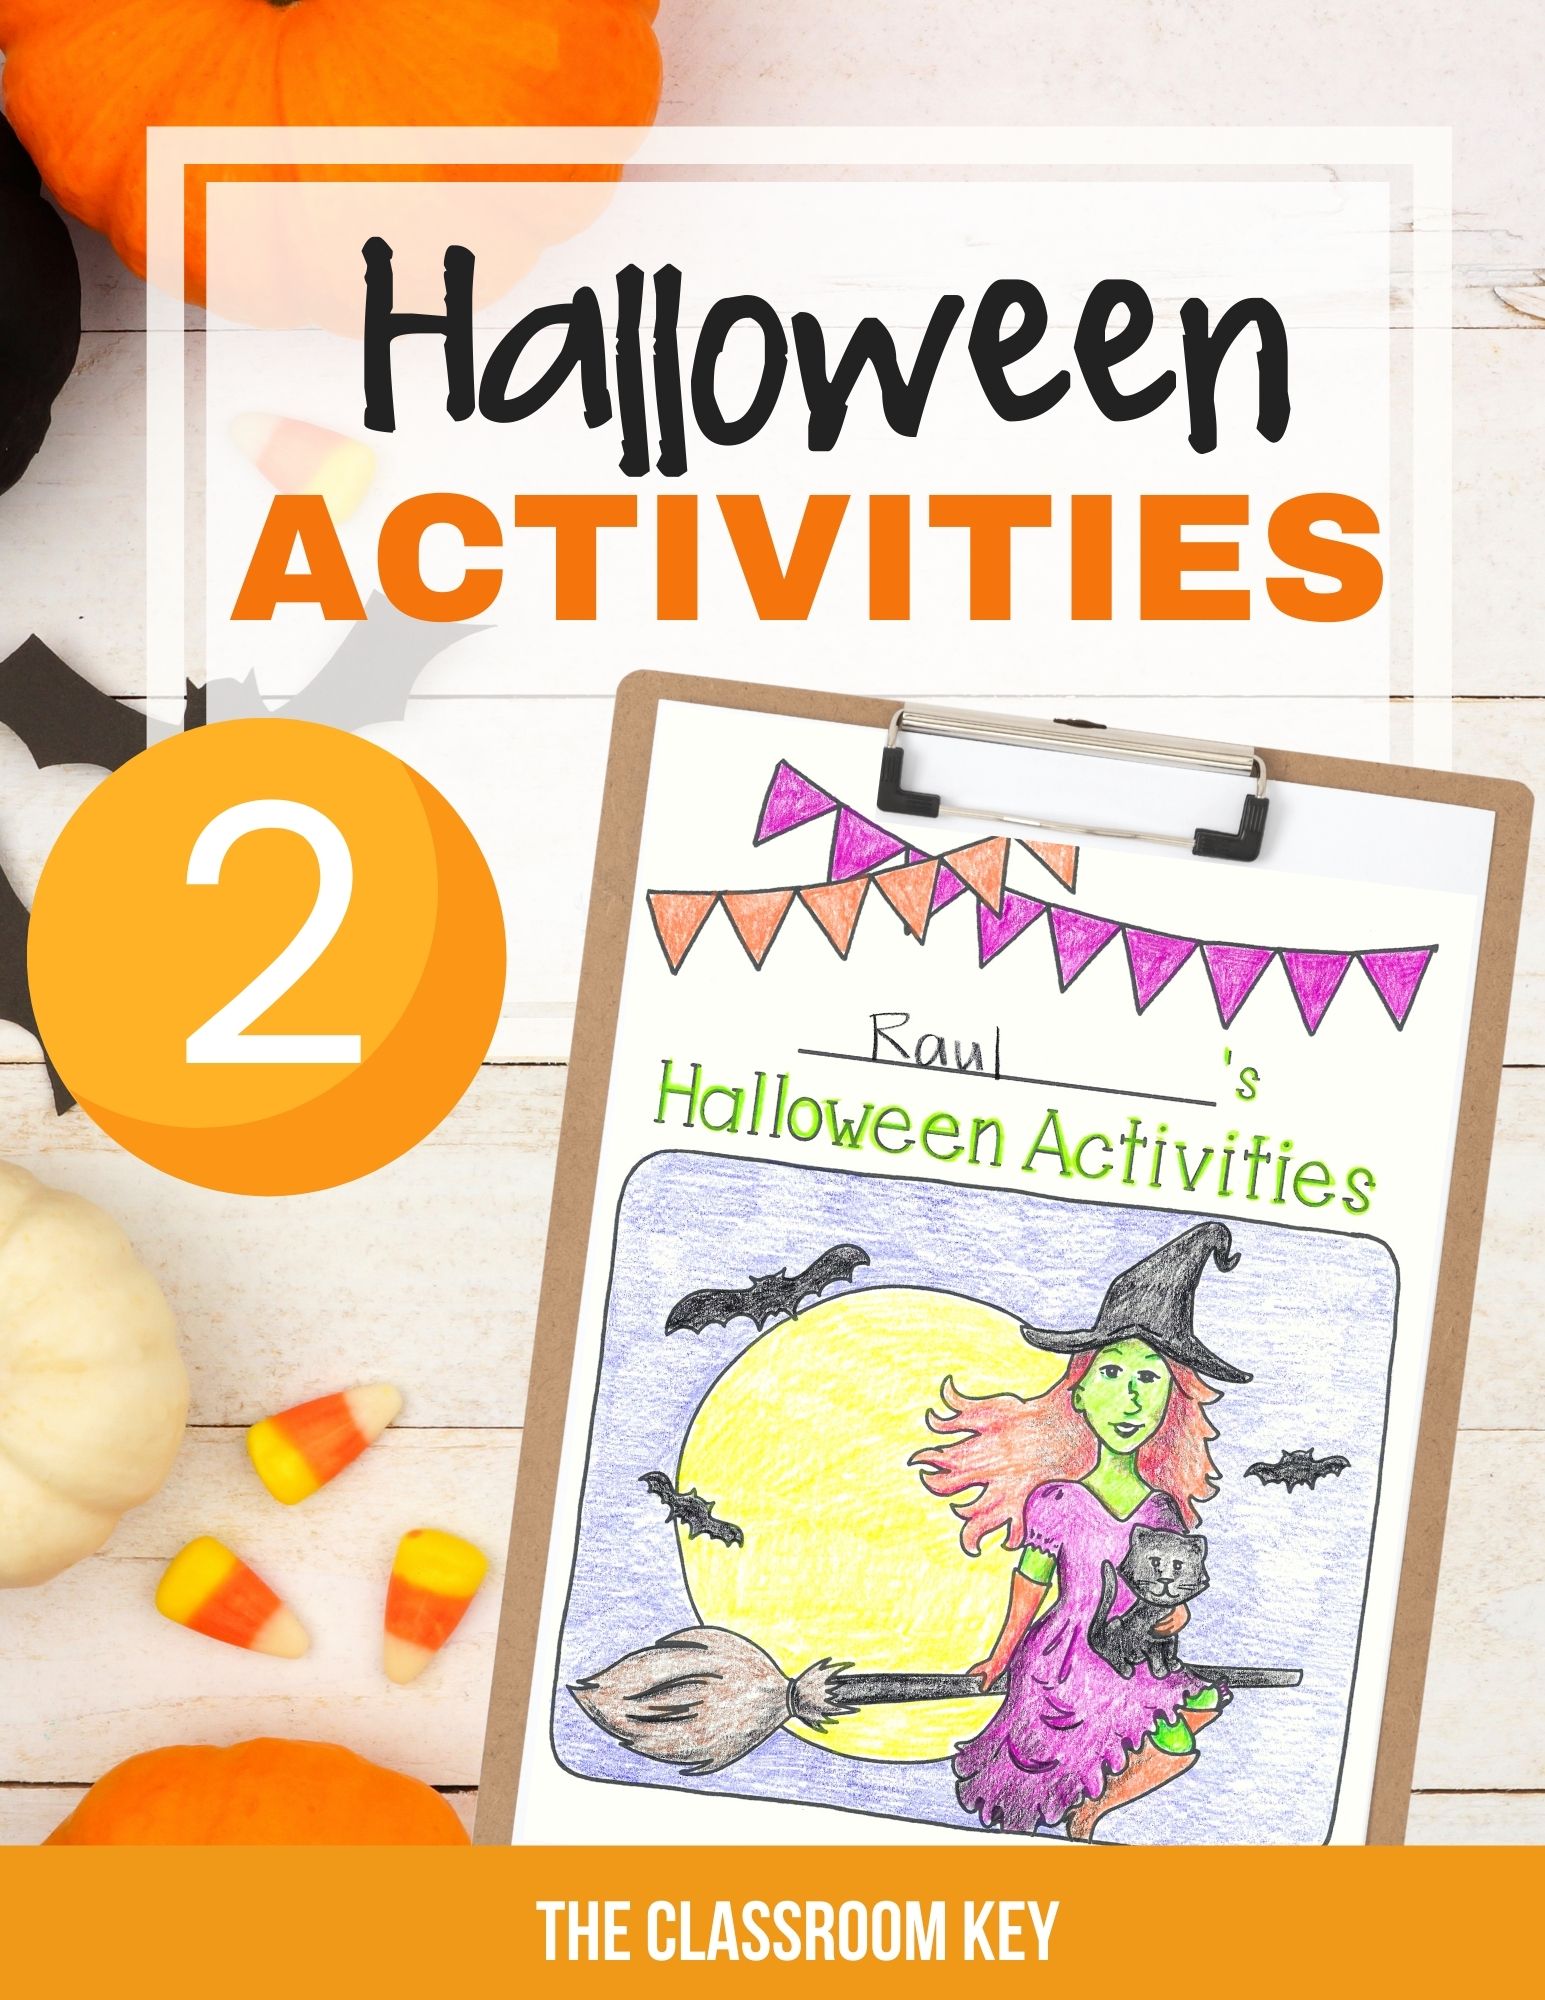 Reading, writing, and math review activities for 2nd grade with a Halloween theme. Use for morning work, earlier finishers, distance learning, and review